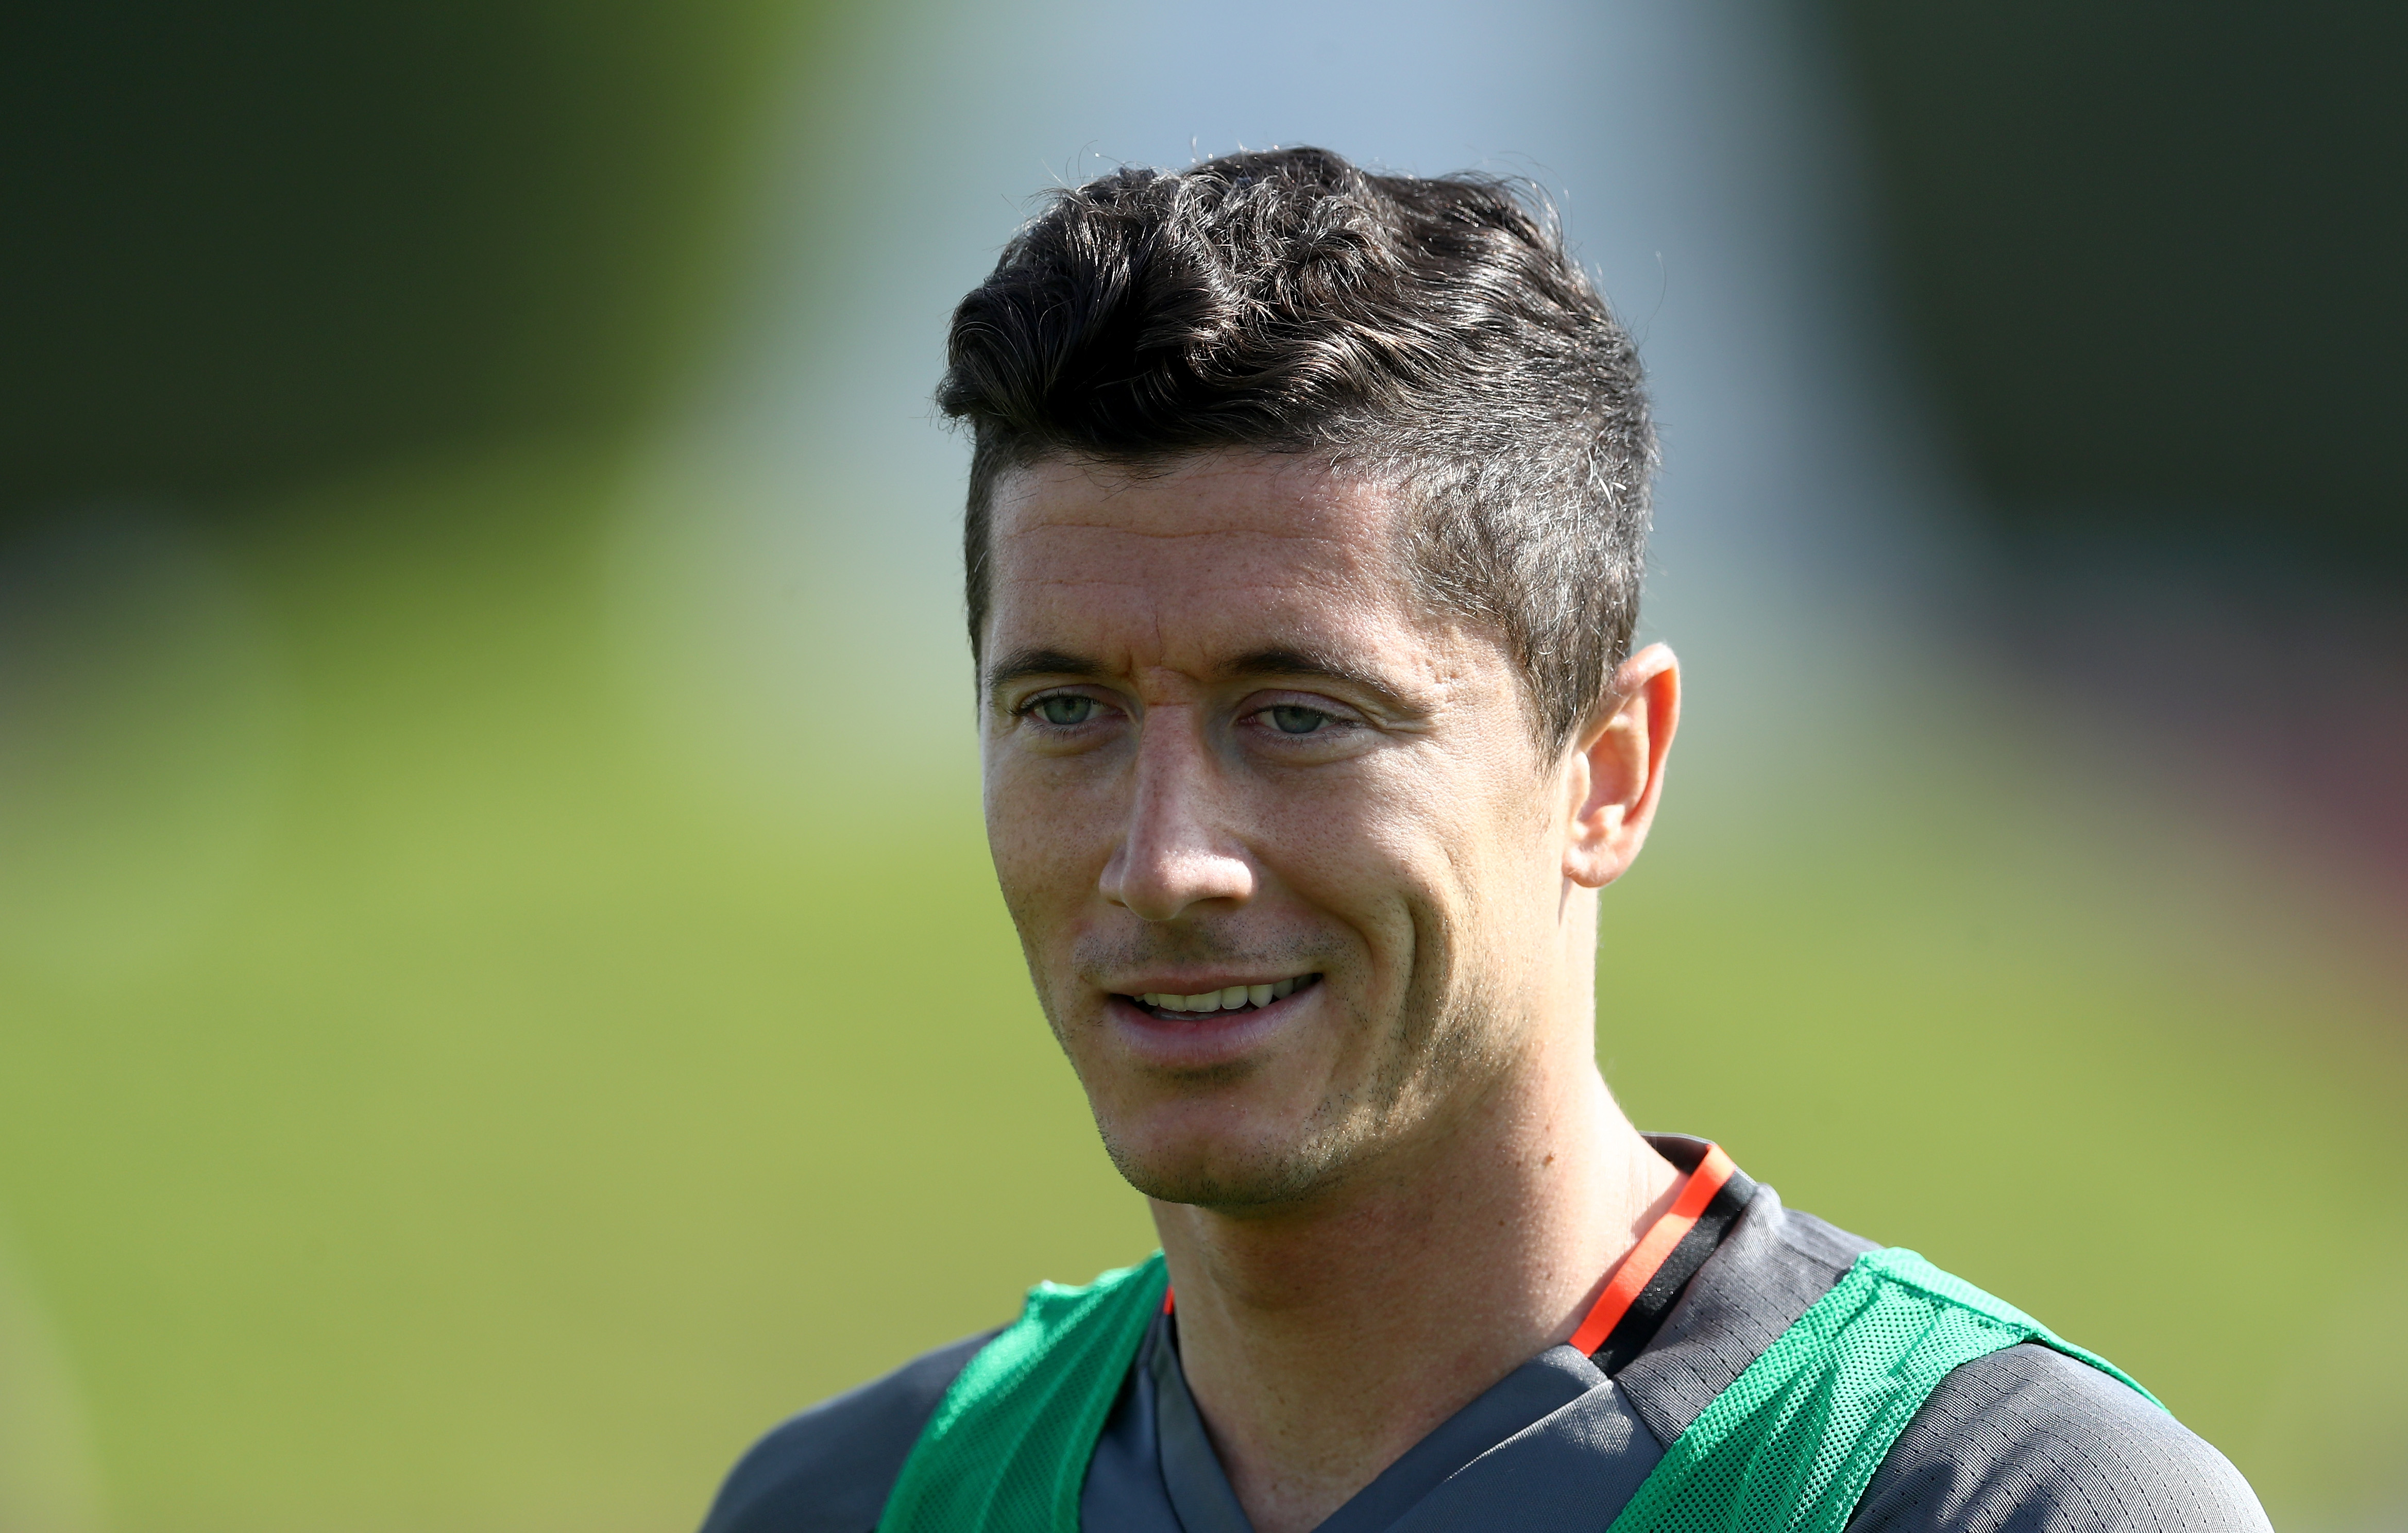 DOHA, QATAR - JANUARY 04:  Robert Lewandowski smiles during a training session at day 2 of the Bayern Muenchen training camp at Aspire Academy on January 4, 2017 in Doha, Qatar.  (Photo by Lars Baron/Bongarts/Getty Images)